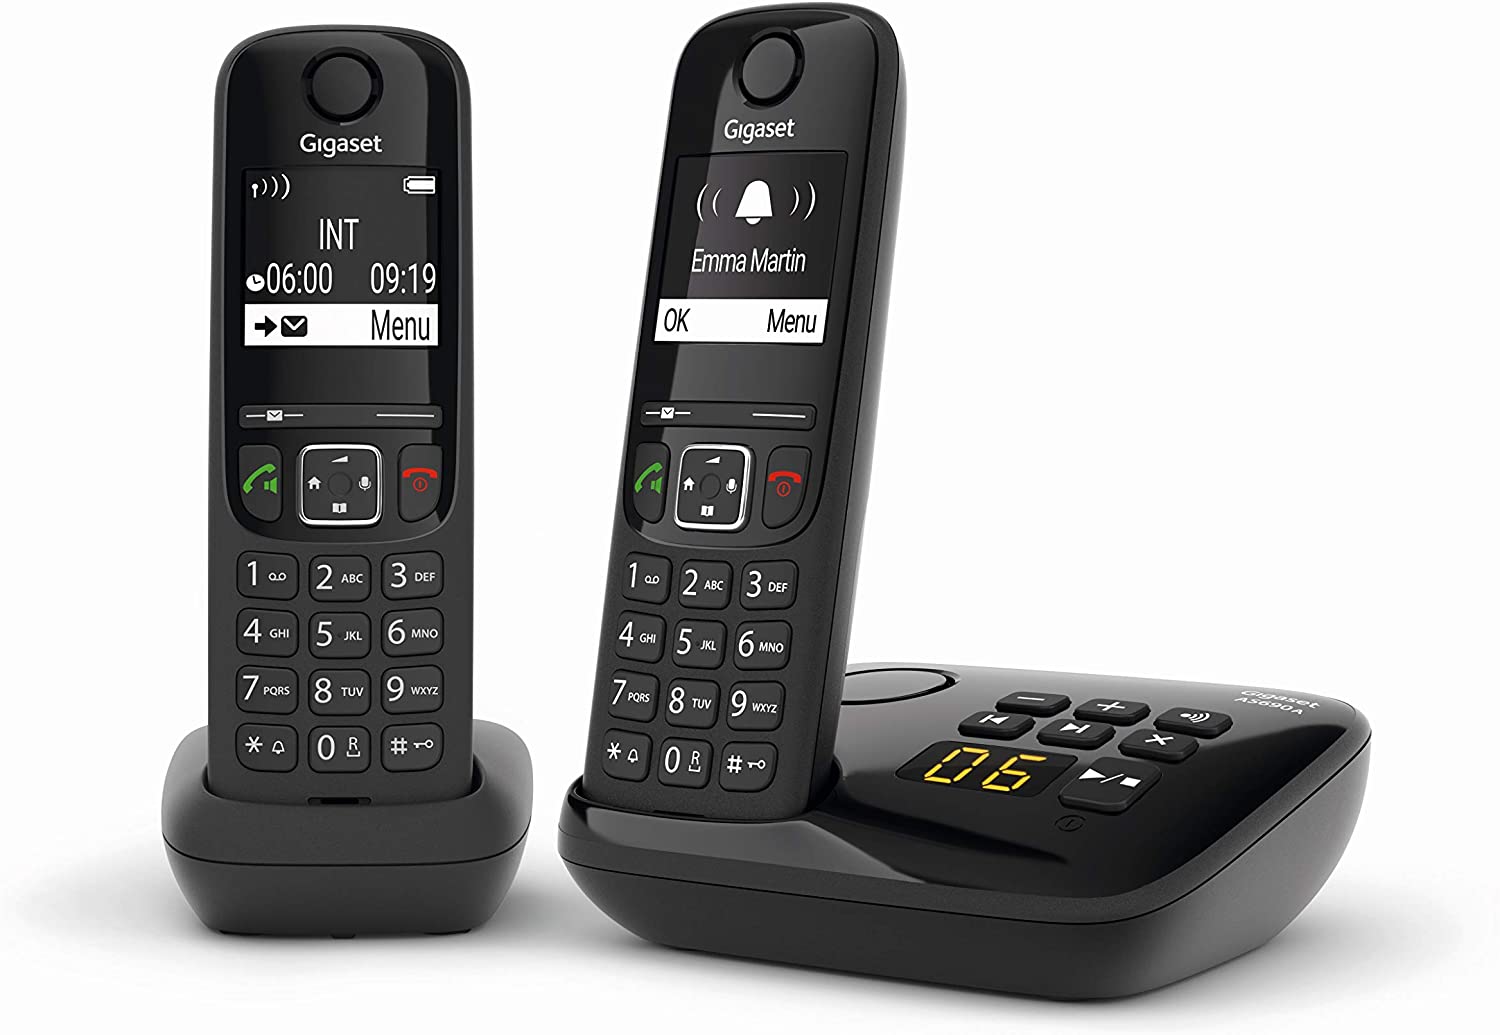 Gigaset AS690A Duo Cordless Telephone, High Quality Handsfree, Illuminated Keypad and Large Display, List of Made, Received and Missed Calls